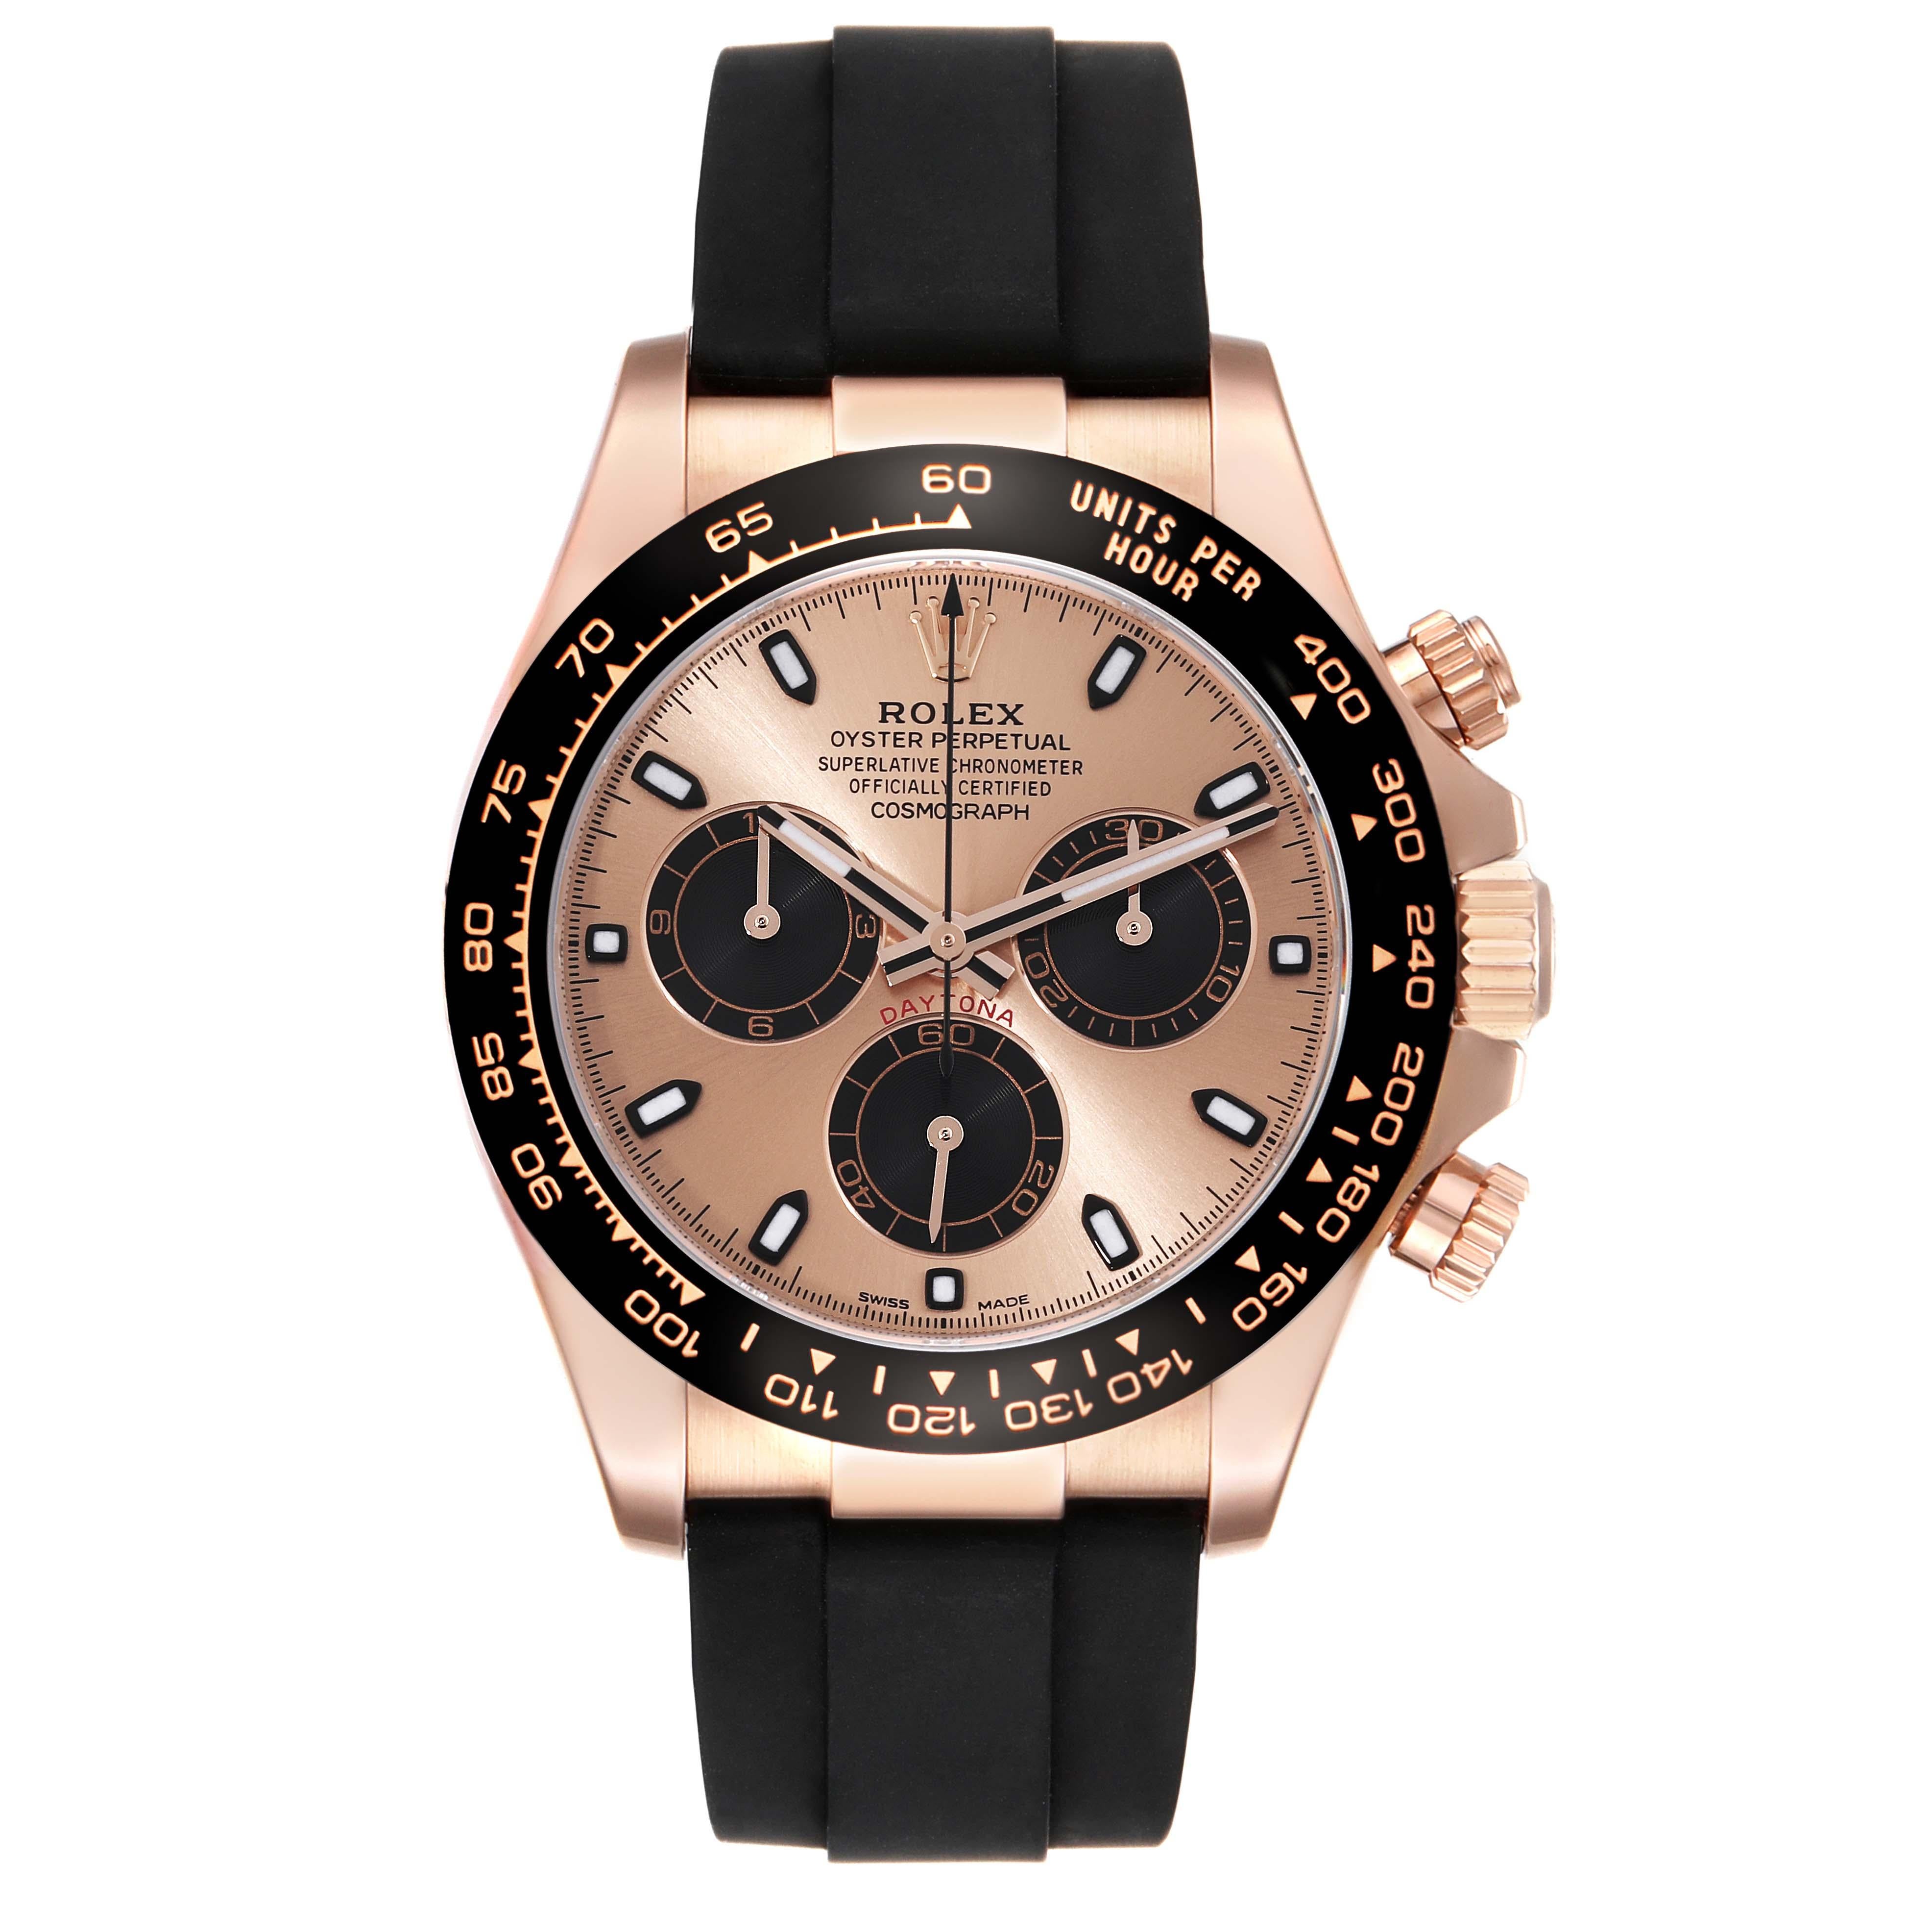 Rolex Cosmograph Daytona Rose Gold Mens Watch 116515 Box Card. Officially certified chronometer automatic self-winding movement. 18K rose gold case 40.0 mm in diameter. Special screw-down push buttons. Screw-down case back. Chronograph pushers and